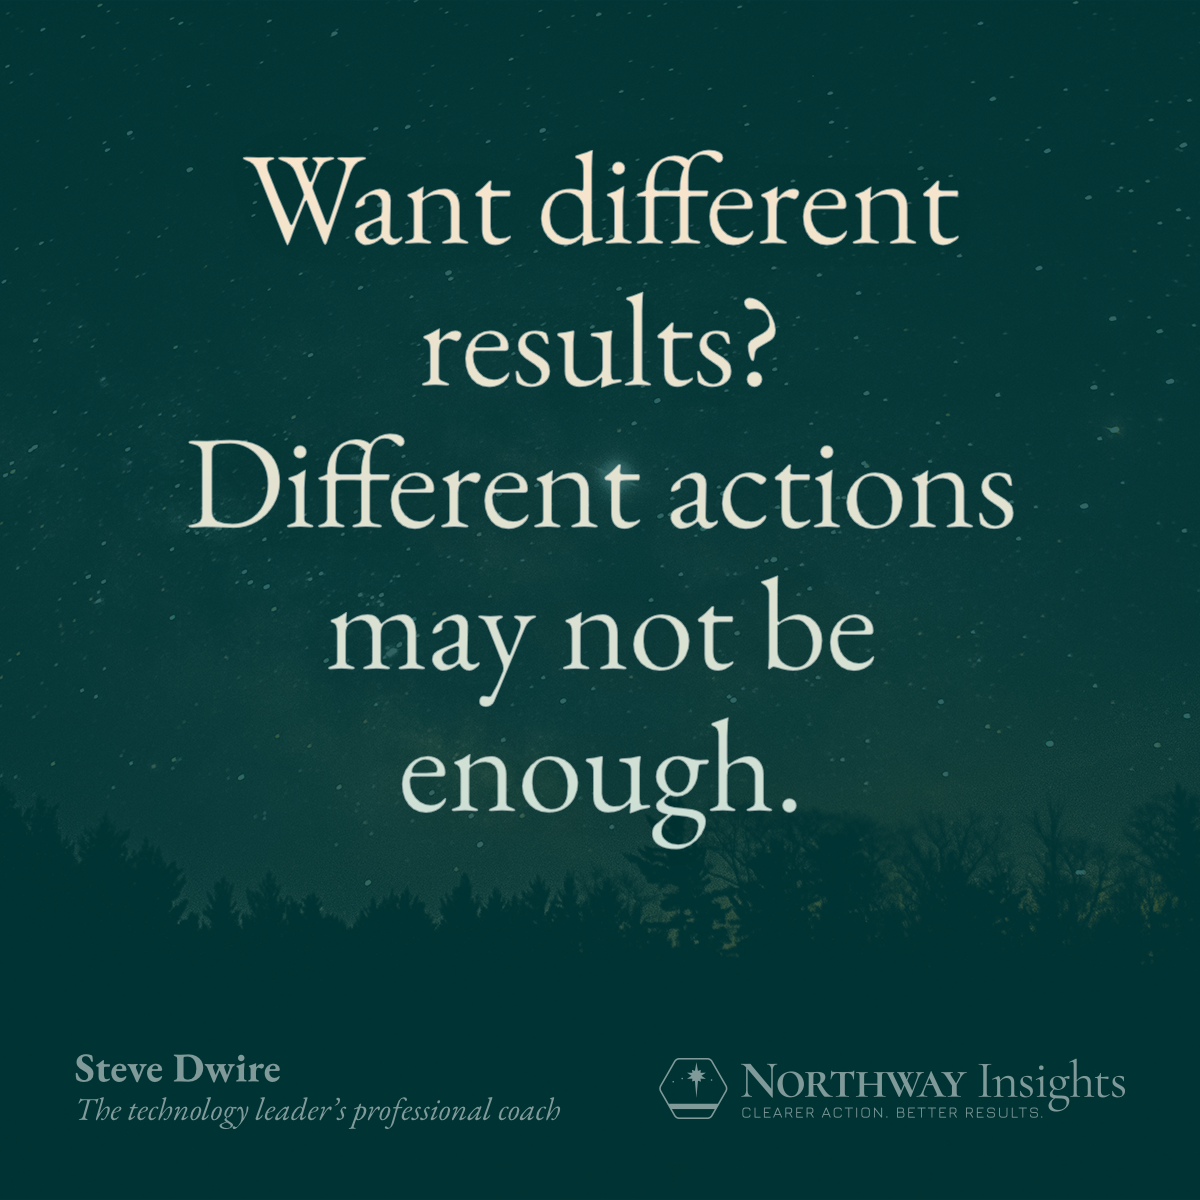 Want different results? Different actions may not be enough.